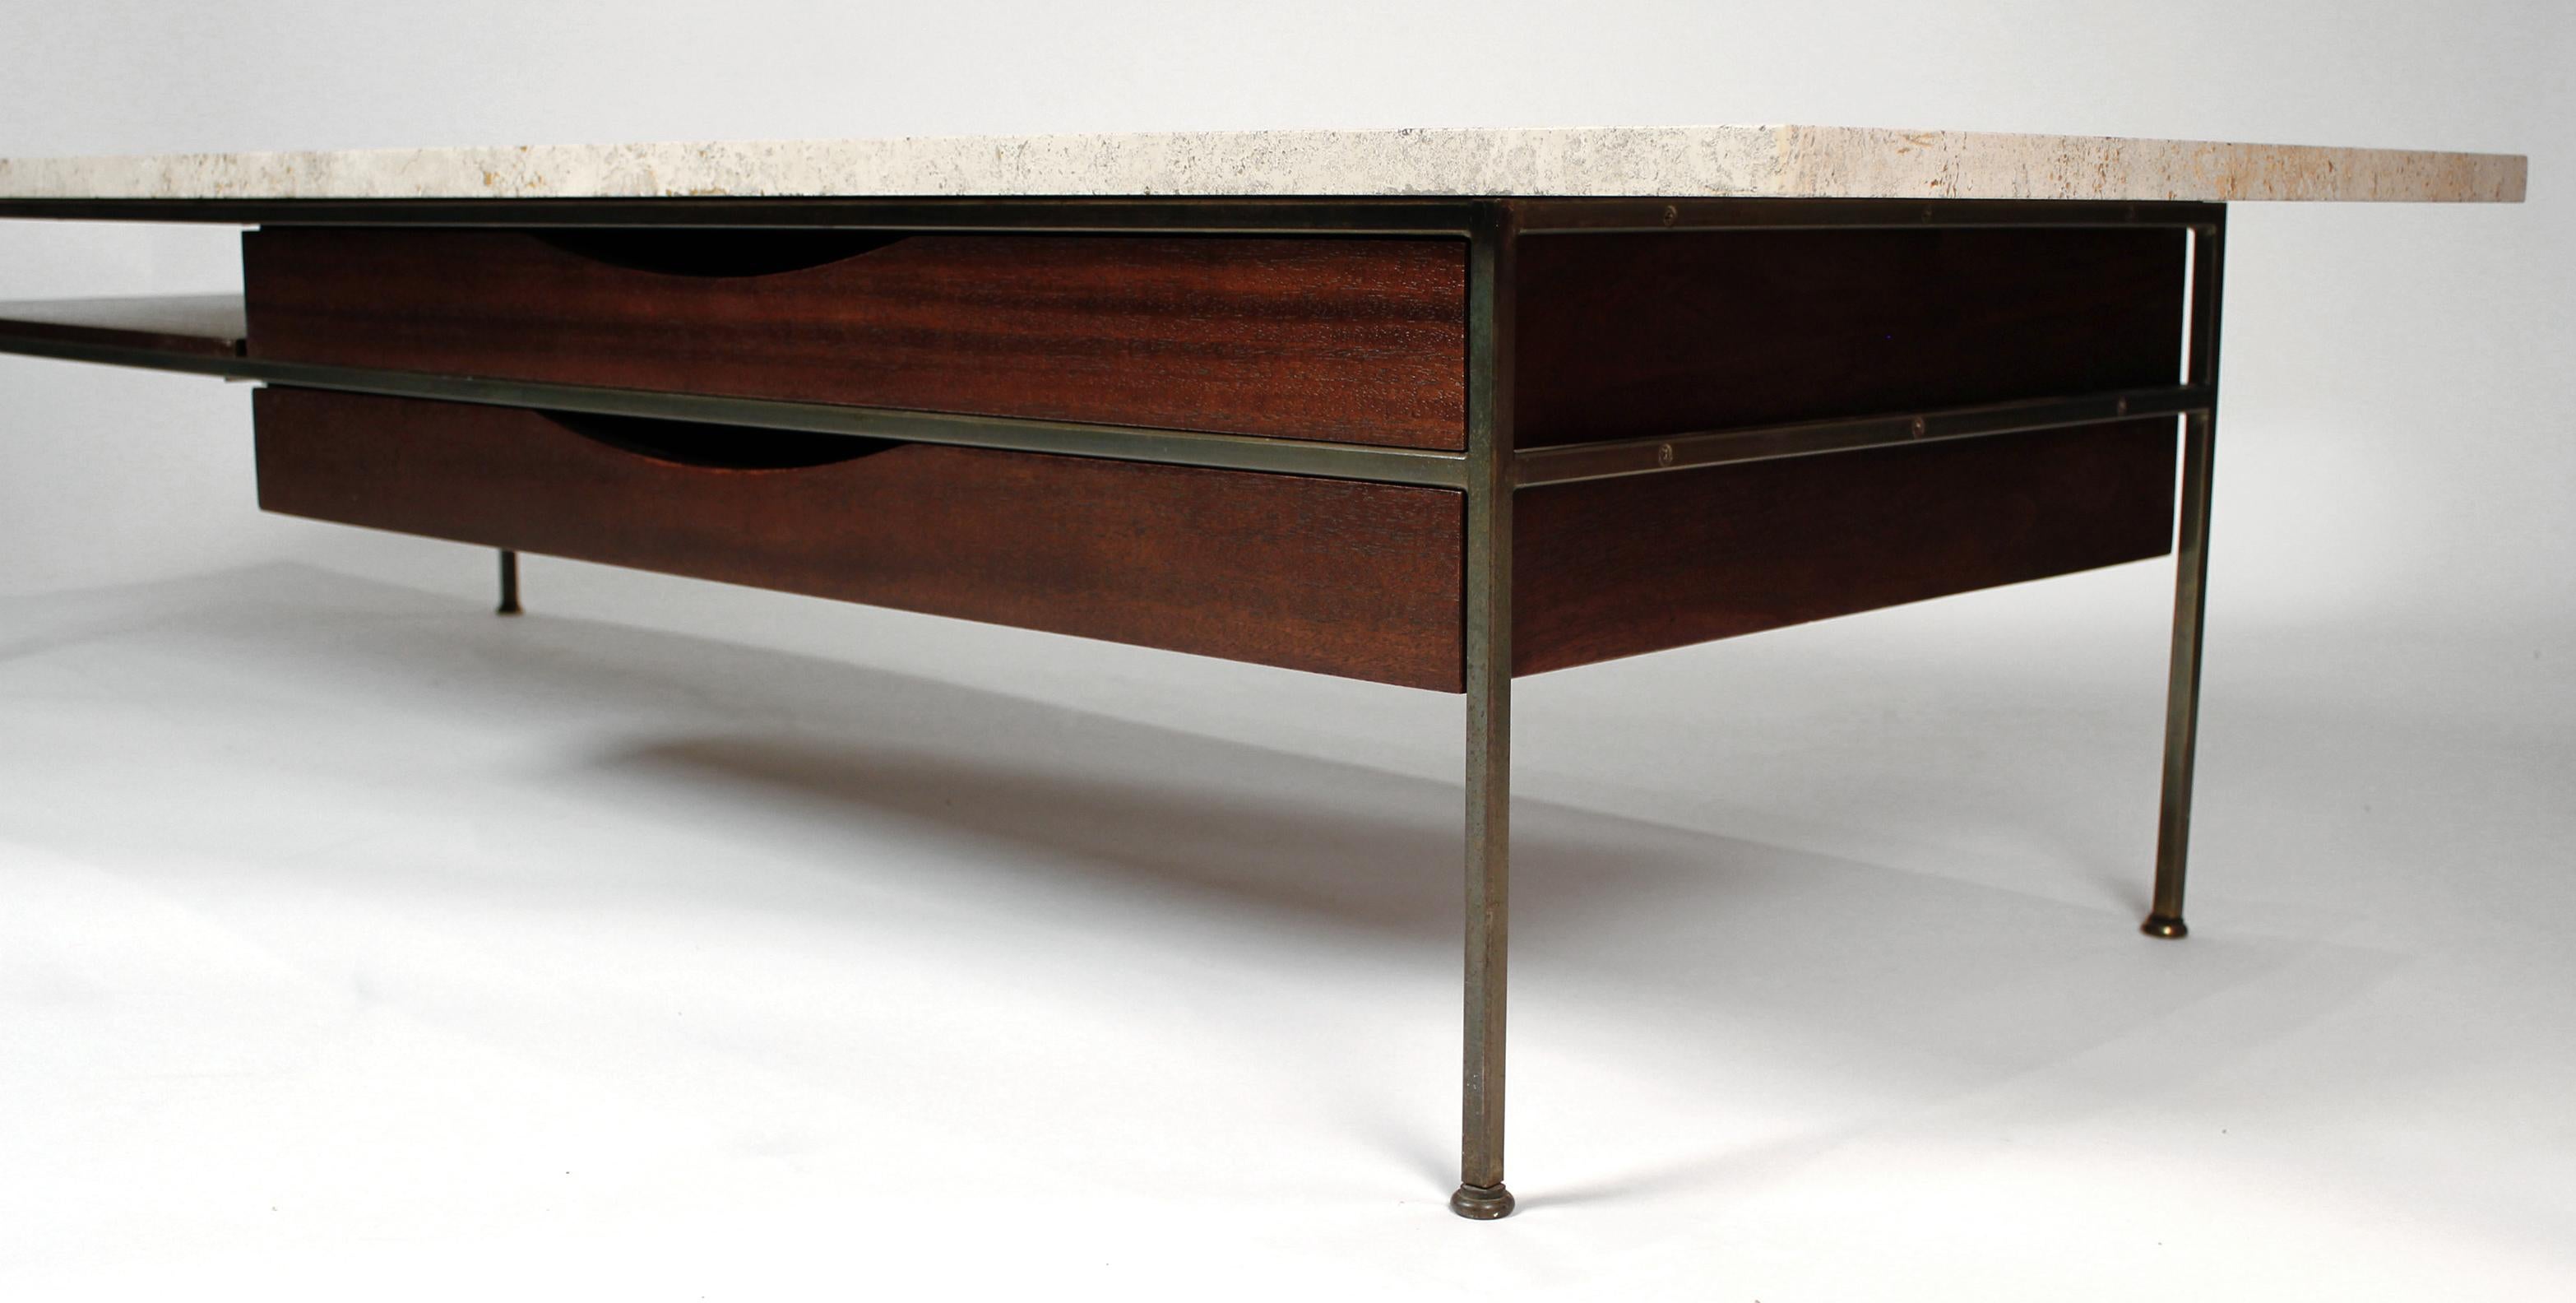 Coffee table designed by Paul McCobb, Irwin collection for Calvin. Table is in excellent condition constructed with brass and mahogany with the original travertine top.